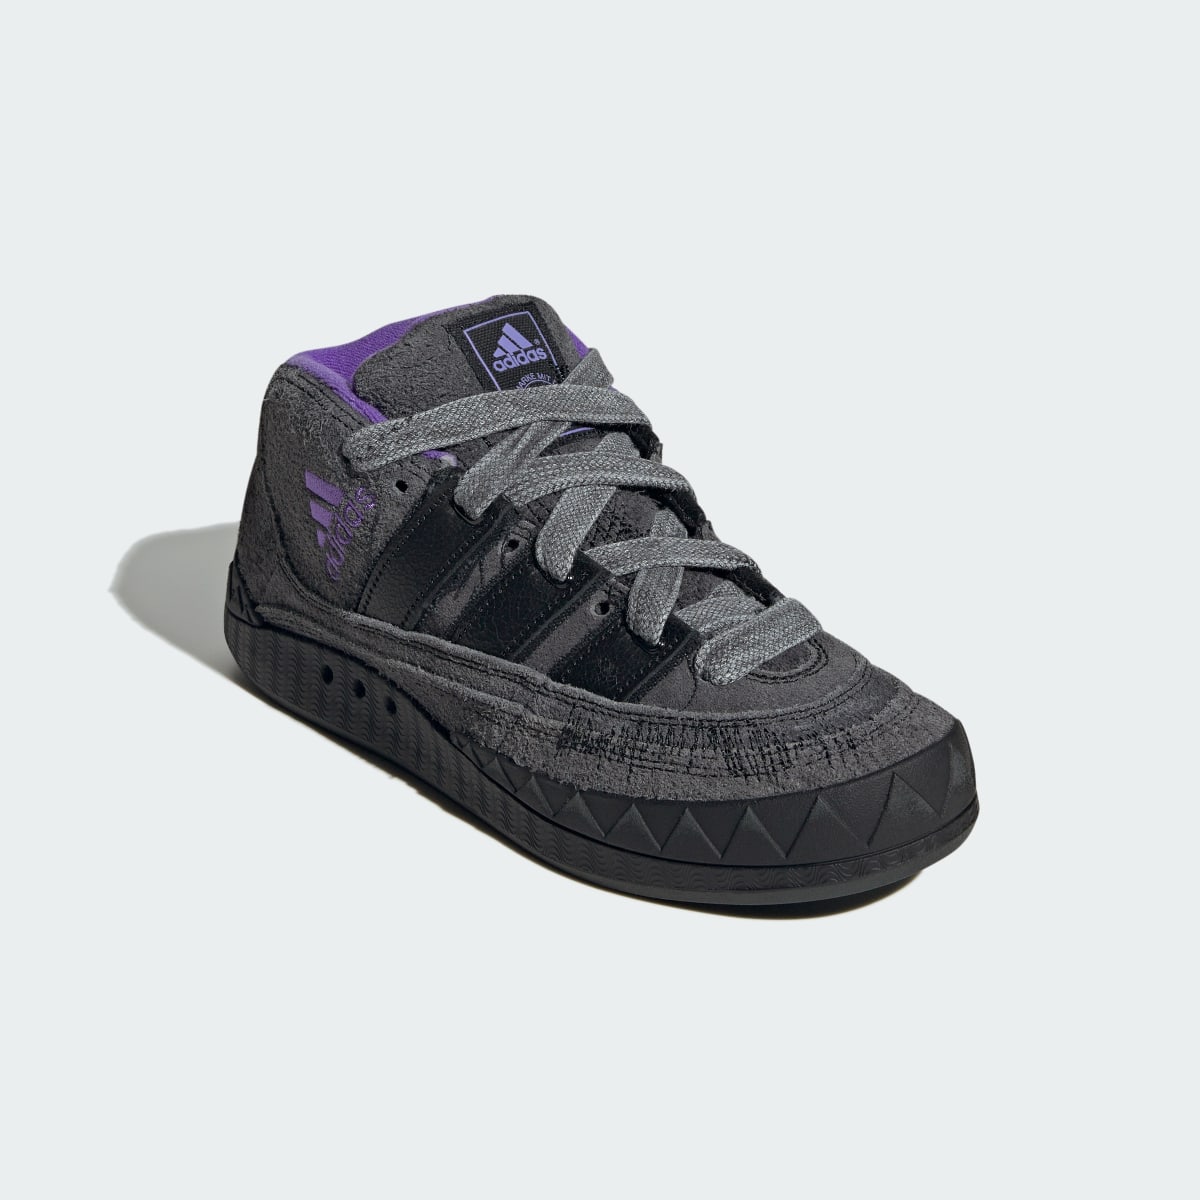 Adidas Adimatic Mid Youth of Paris Shoes. 6